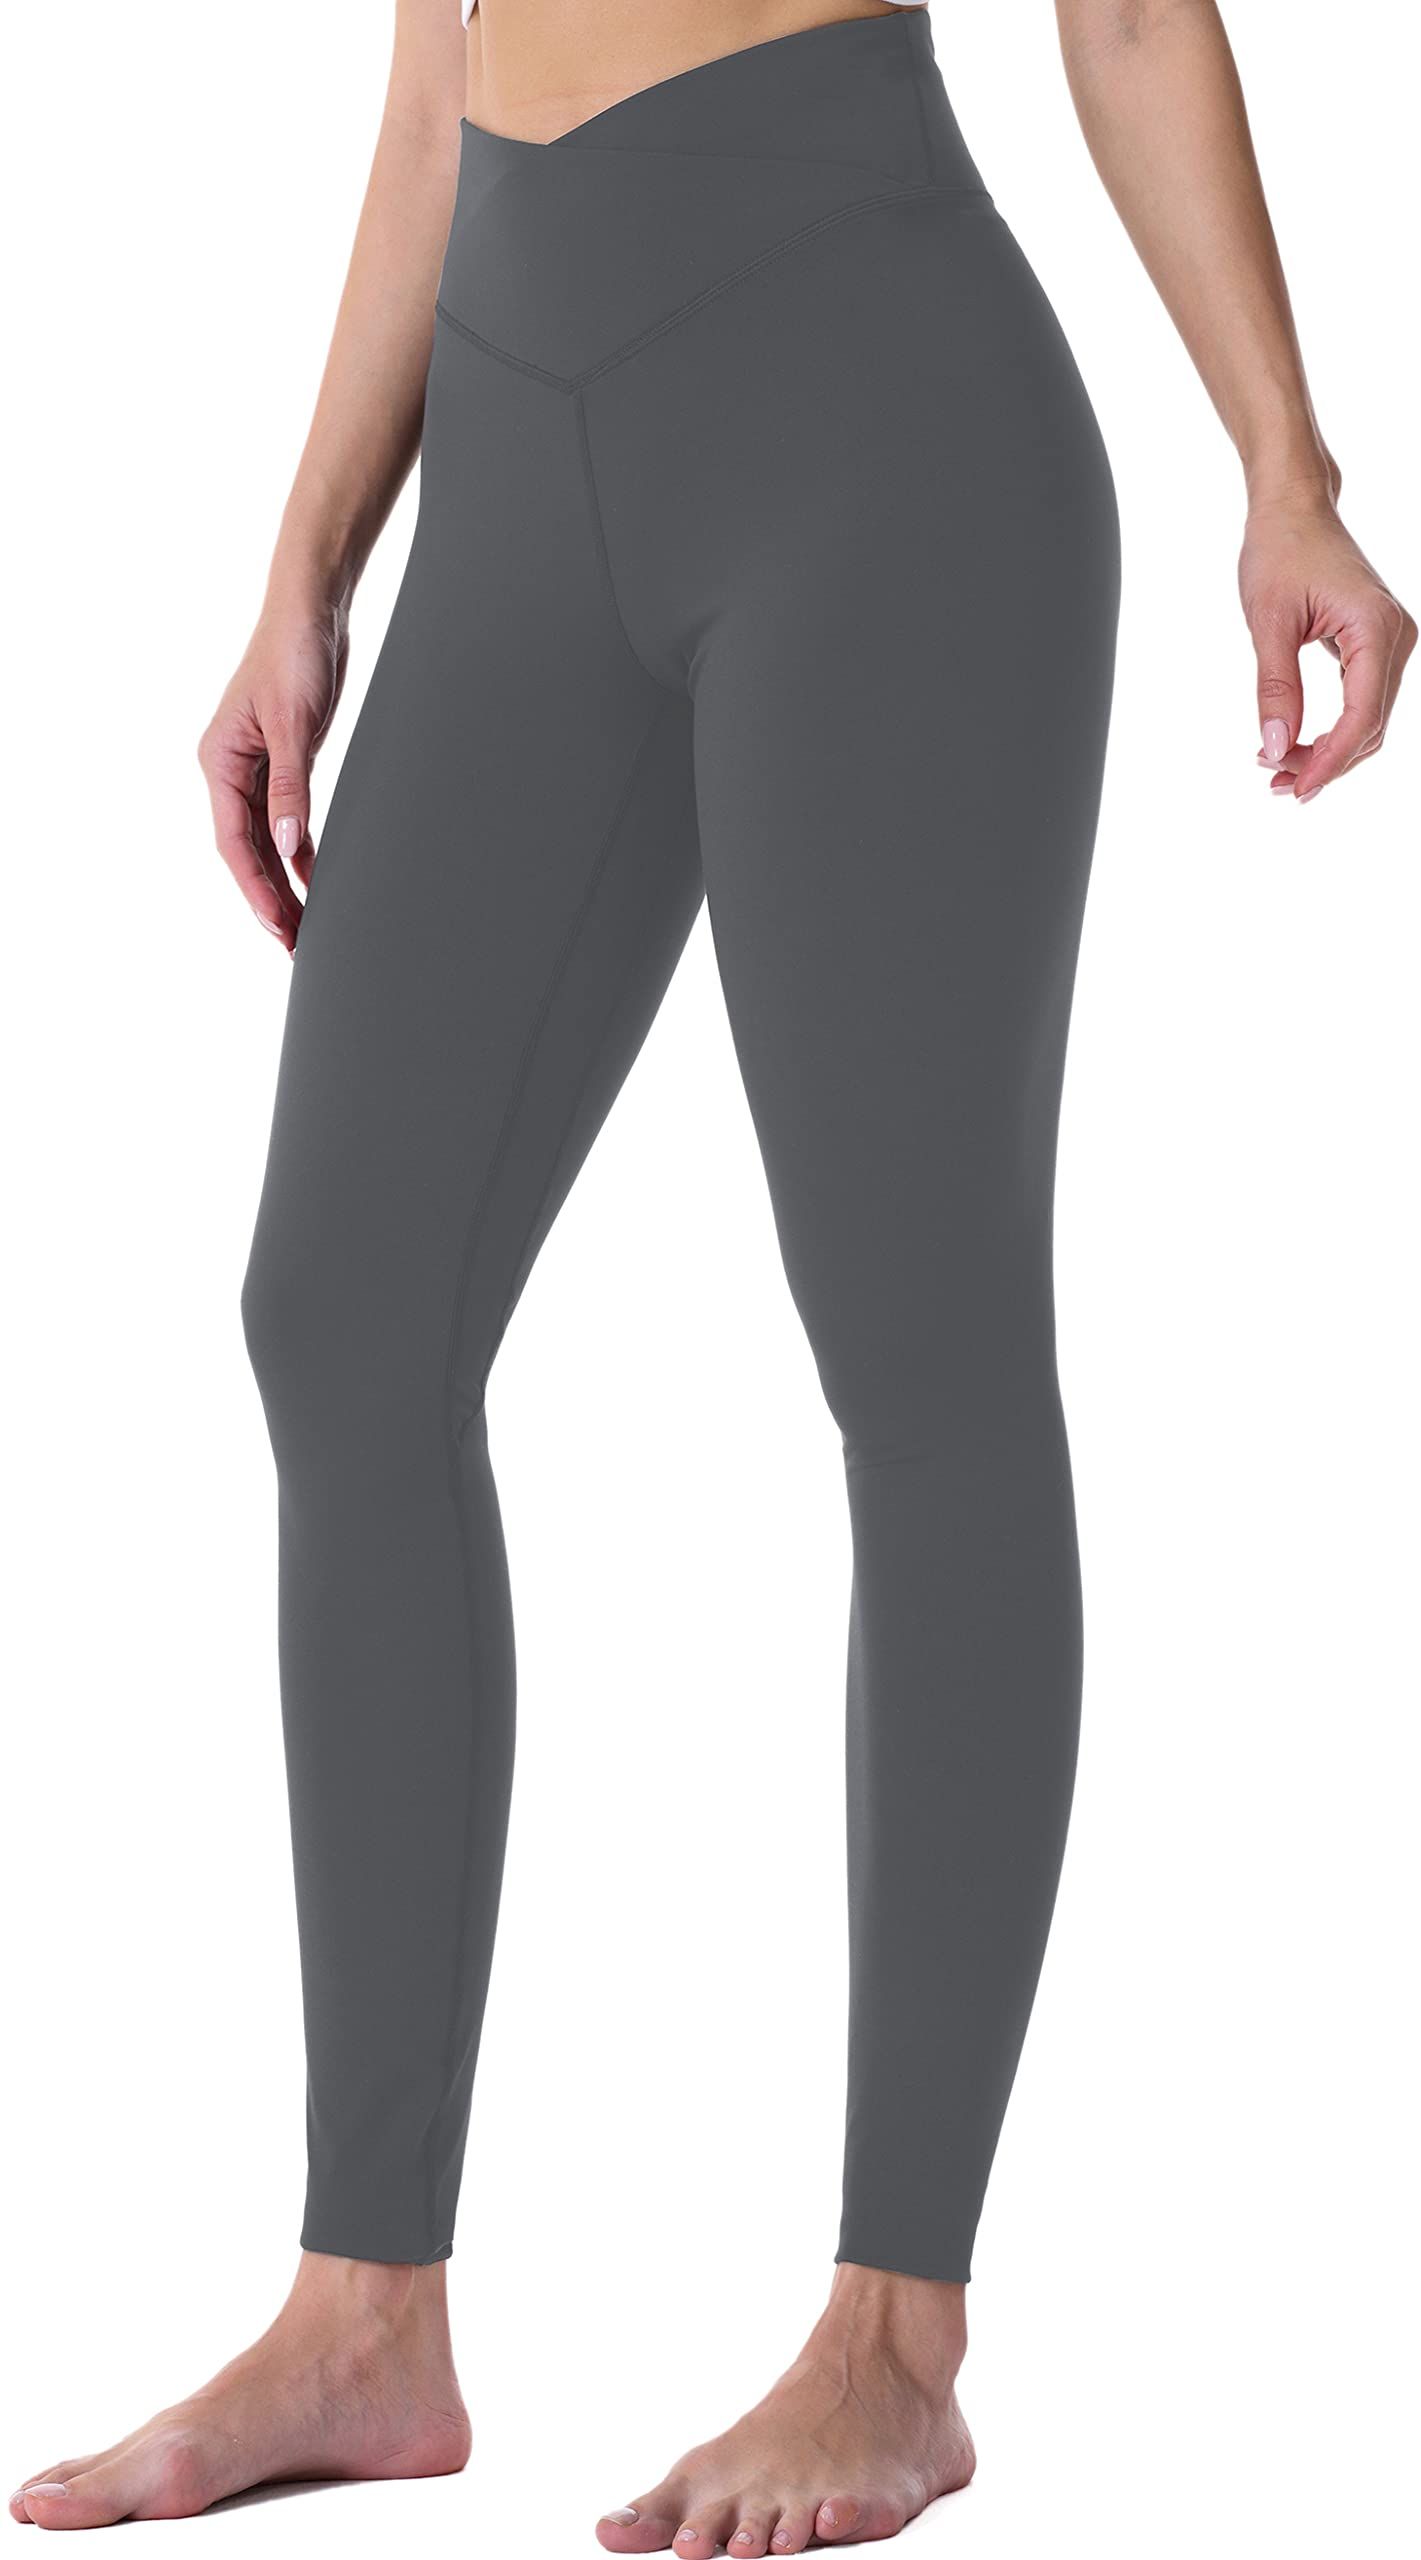 The 17 Best Squat-Proof Leggings for Your Next Workout | Who What Wear